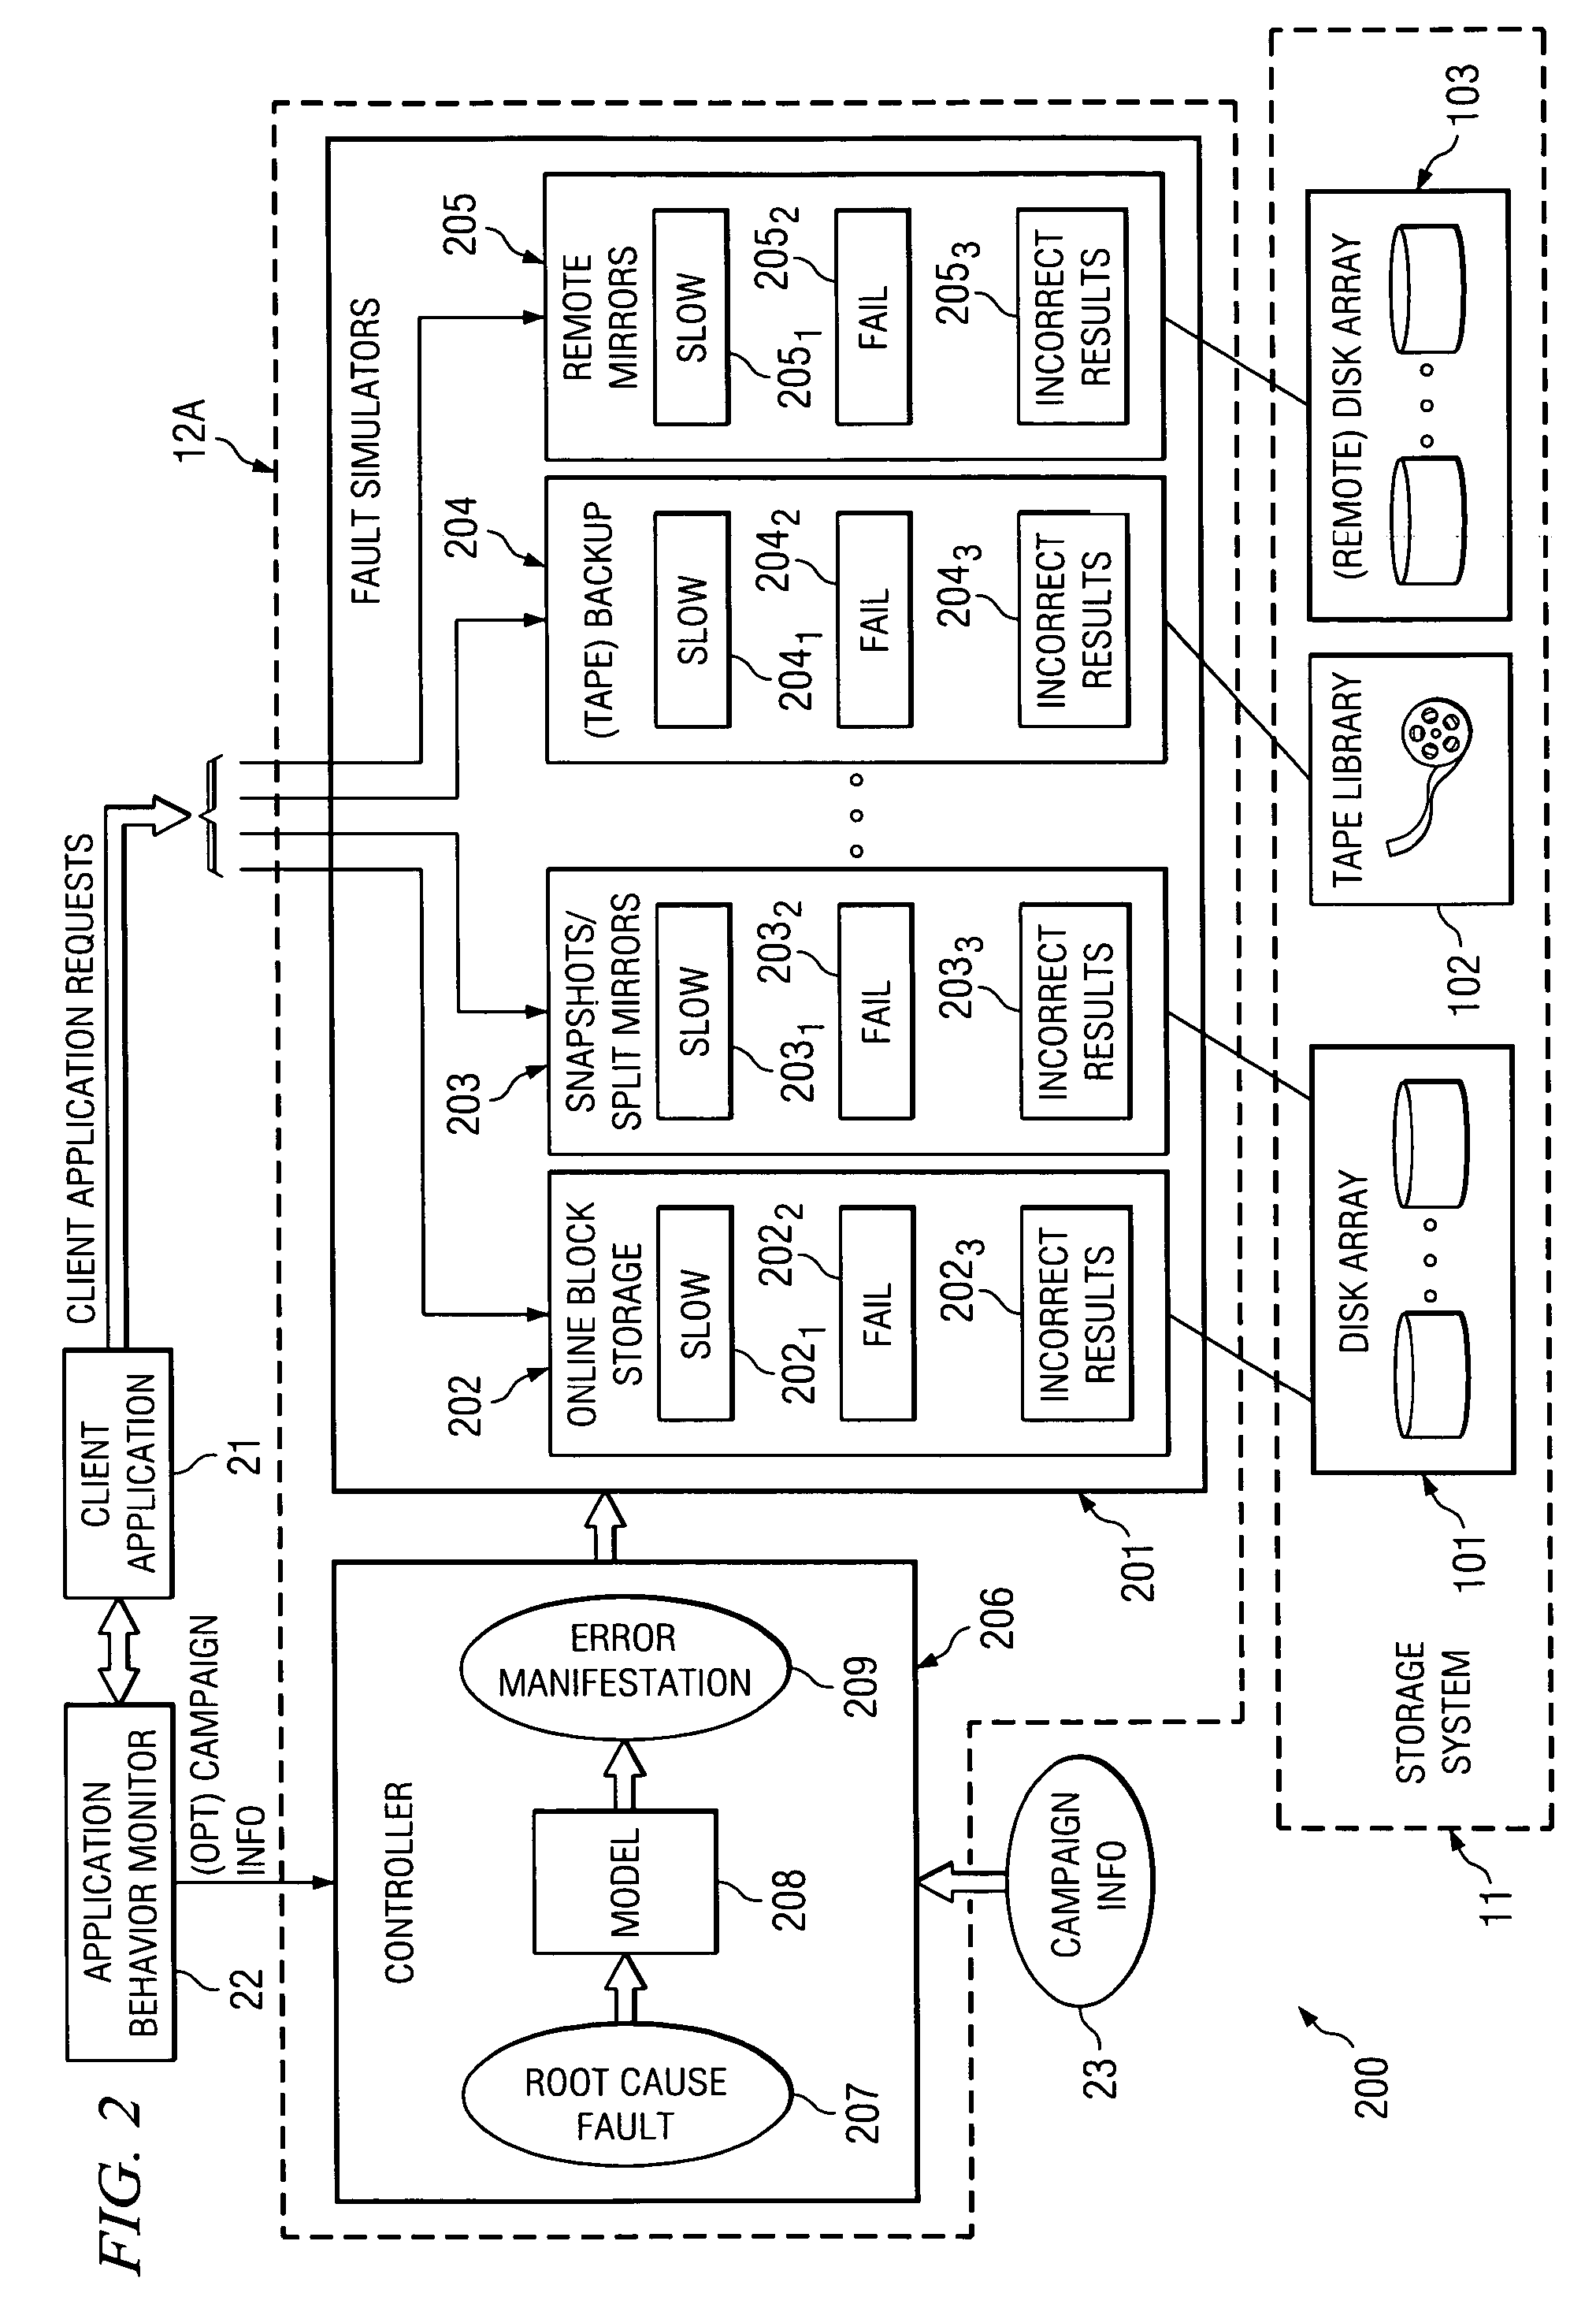 System and method for interposition-based selective simulation of faults for access requests to a data storage system